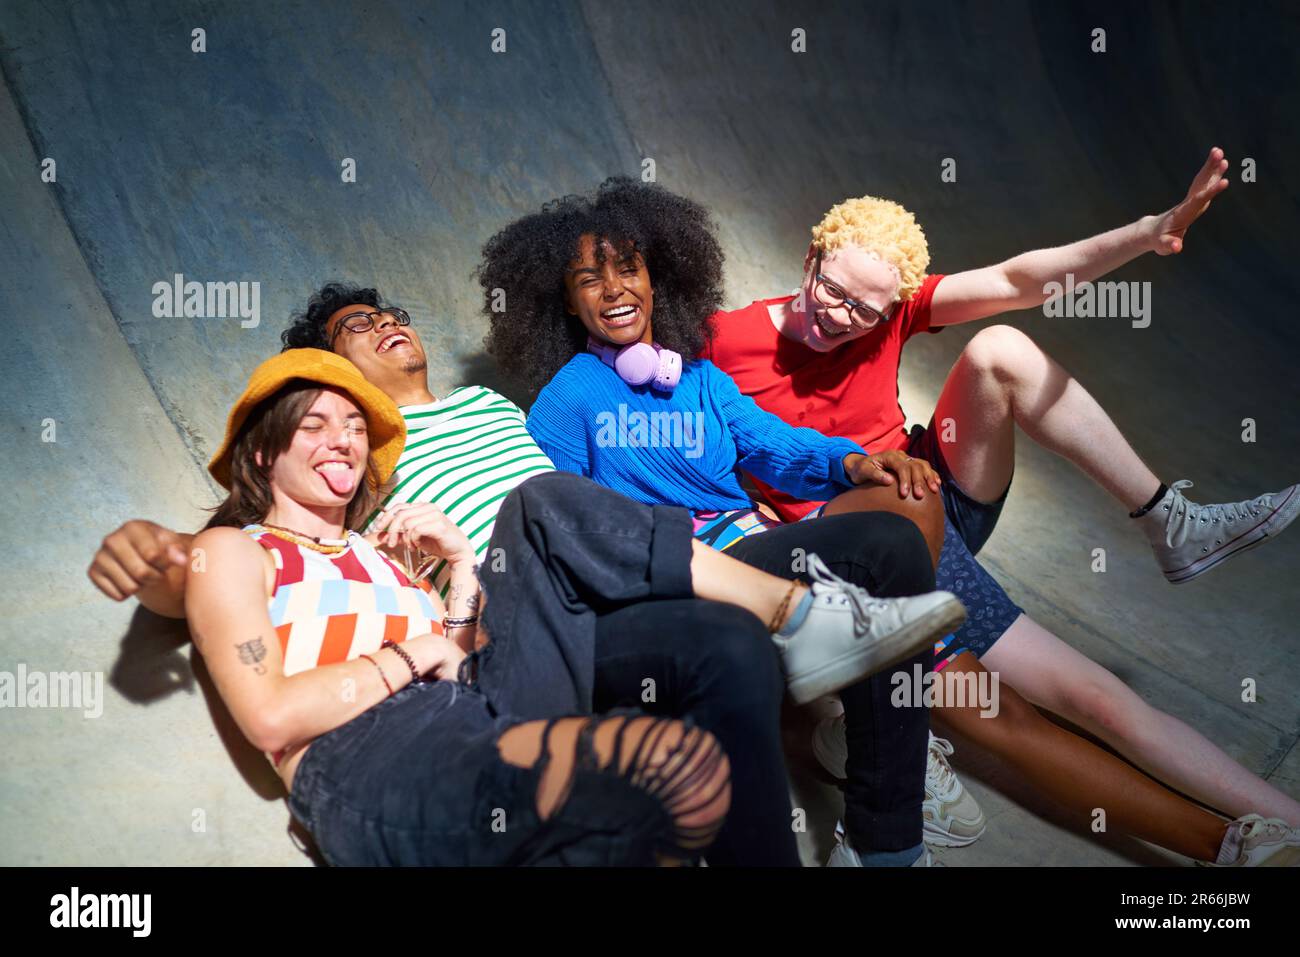 Portrait happy, carefree young friends laughing on sports ramp Stock Photo